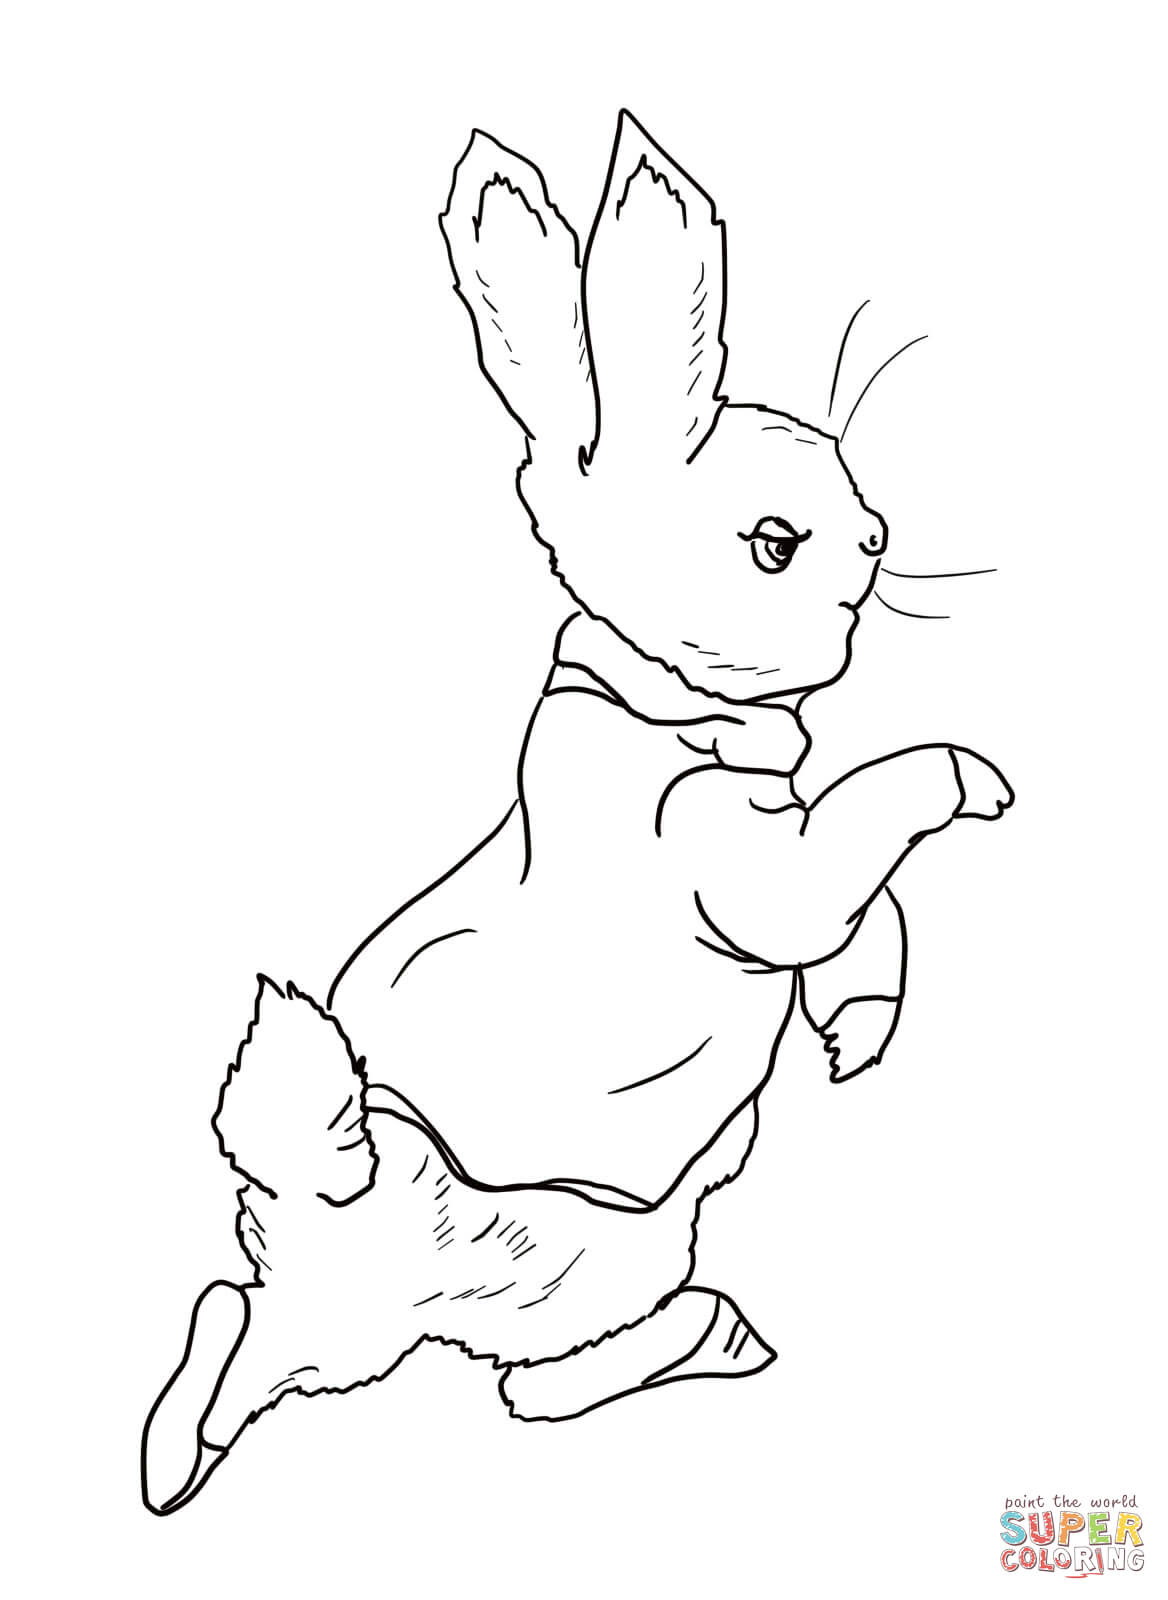 Free Rabbit Coloring Pages Peter Rabbit Is Going Into The Garden Coloring Page Free Printable